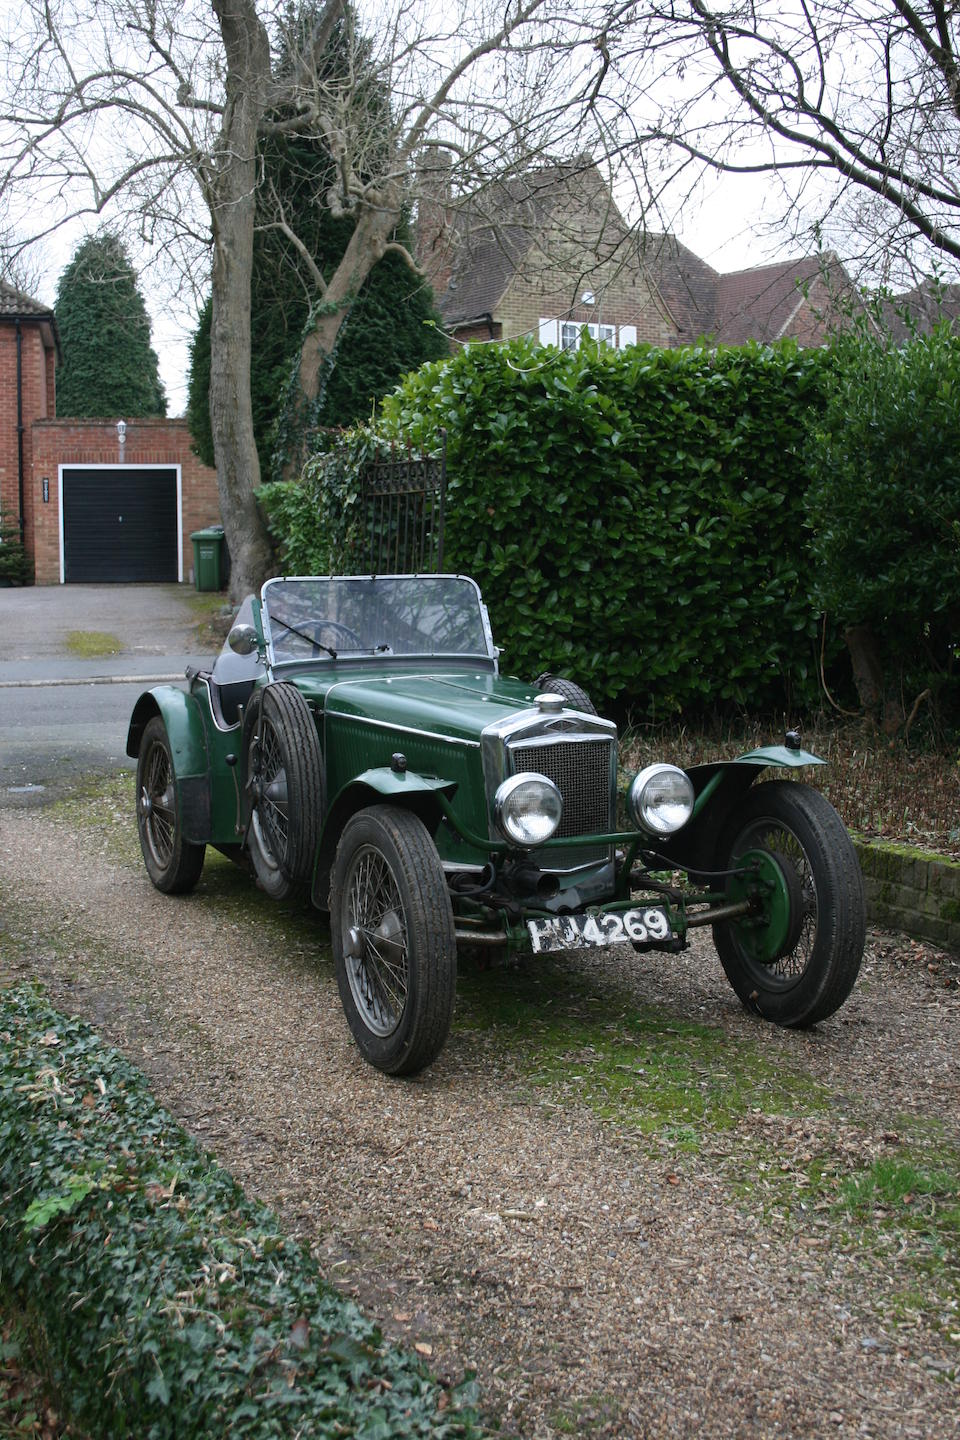 From the estate of the late E.A. Stafford East,c.1929 Frazer Nash AC-engined Sports Two-seater  Engine no. To be advised